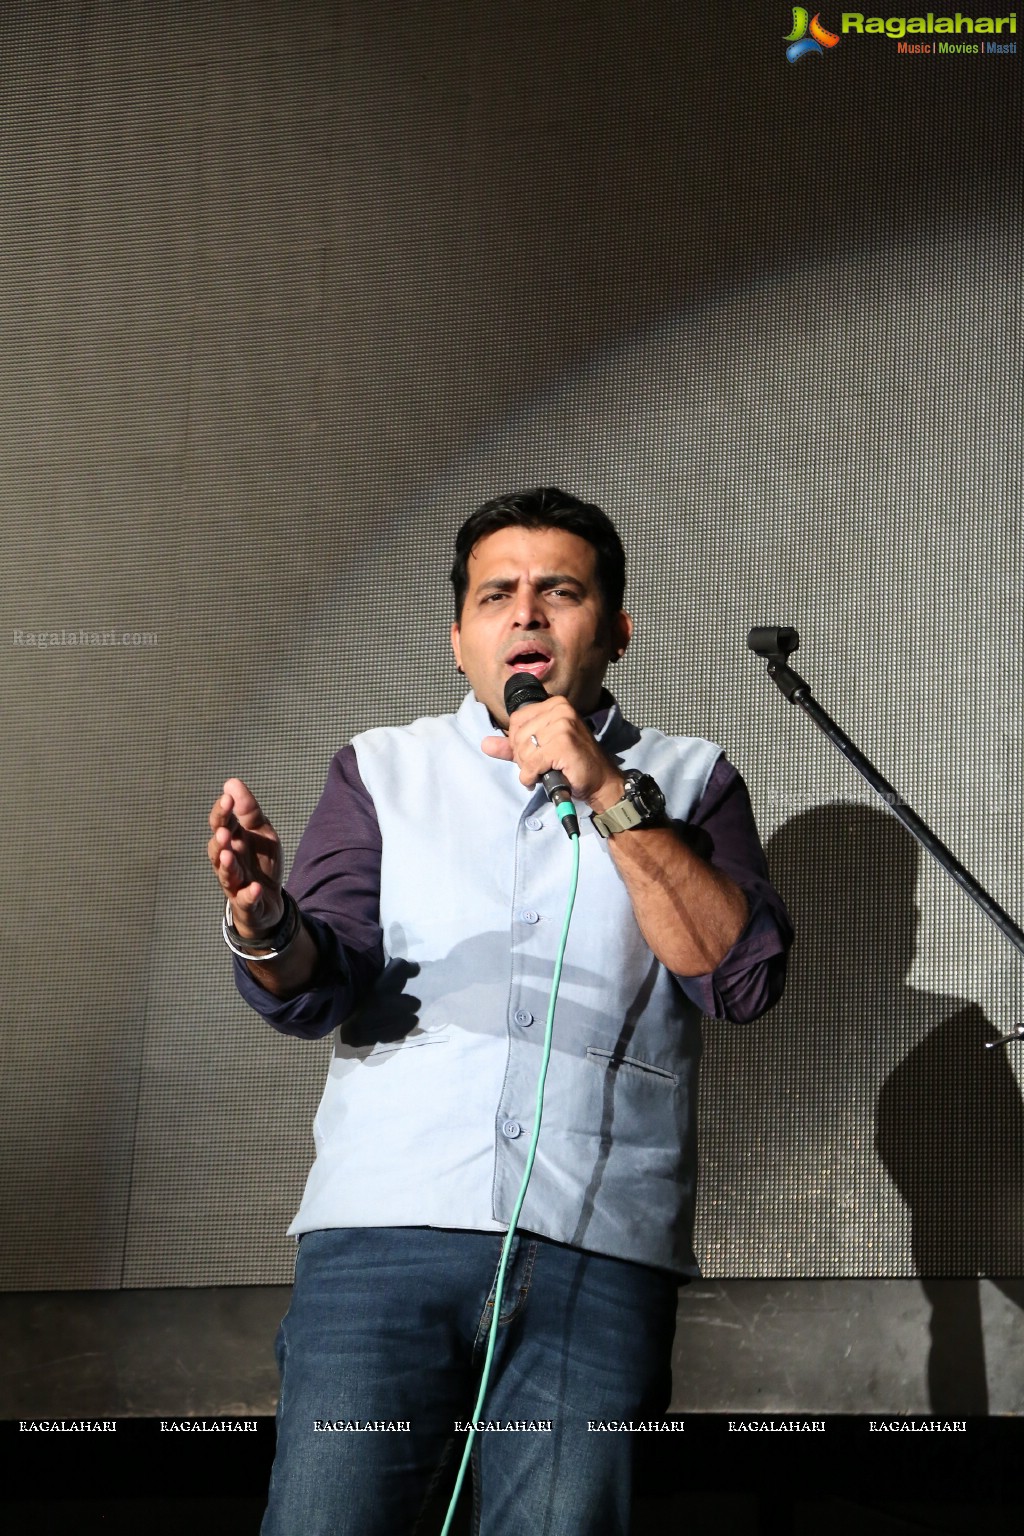 Amit Tandon's Stand-Up Comedy at Heart Cup Cafe, Hyderabad